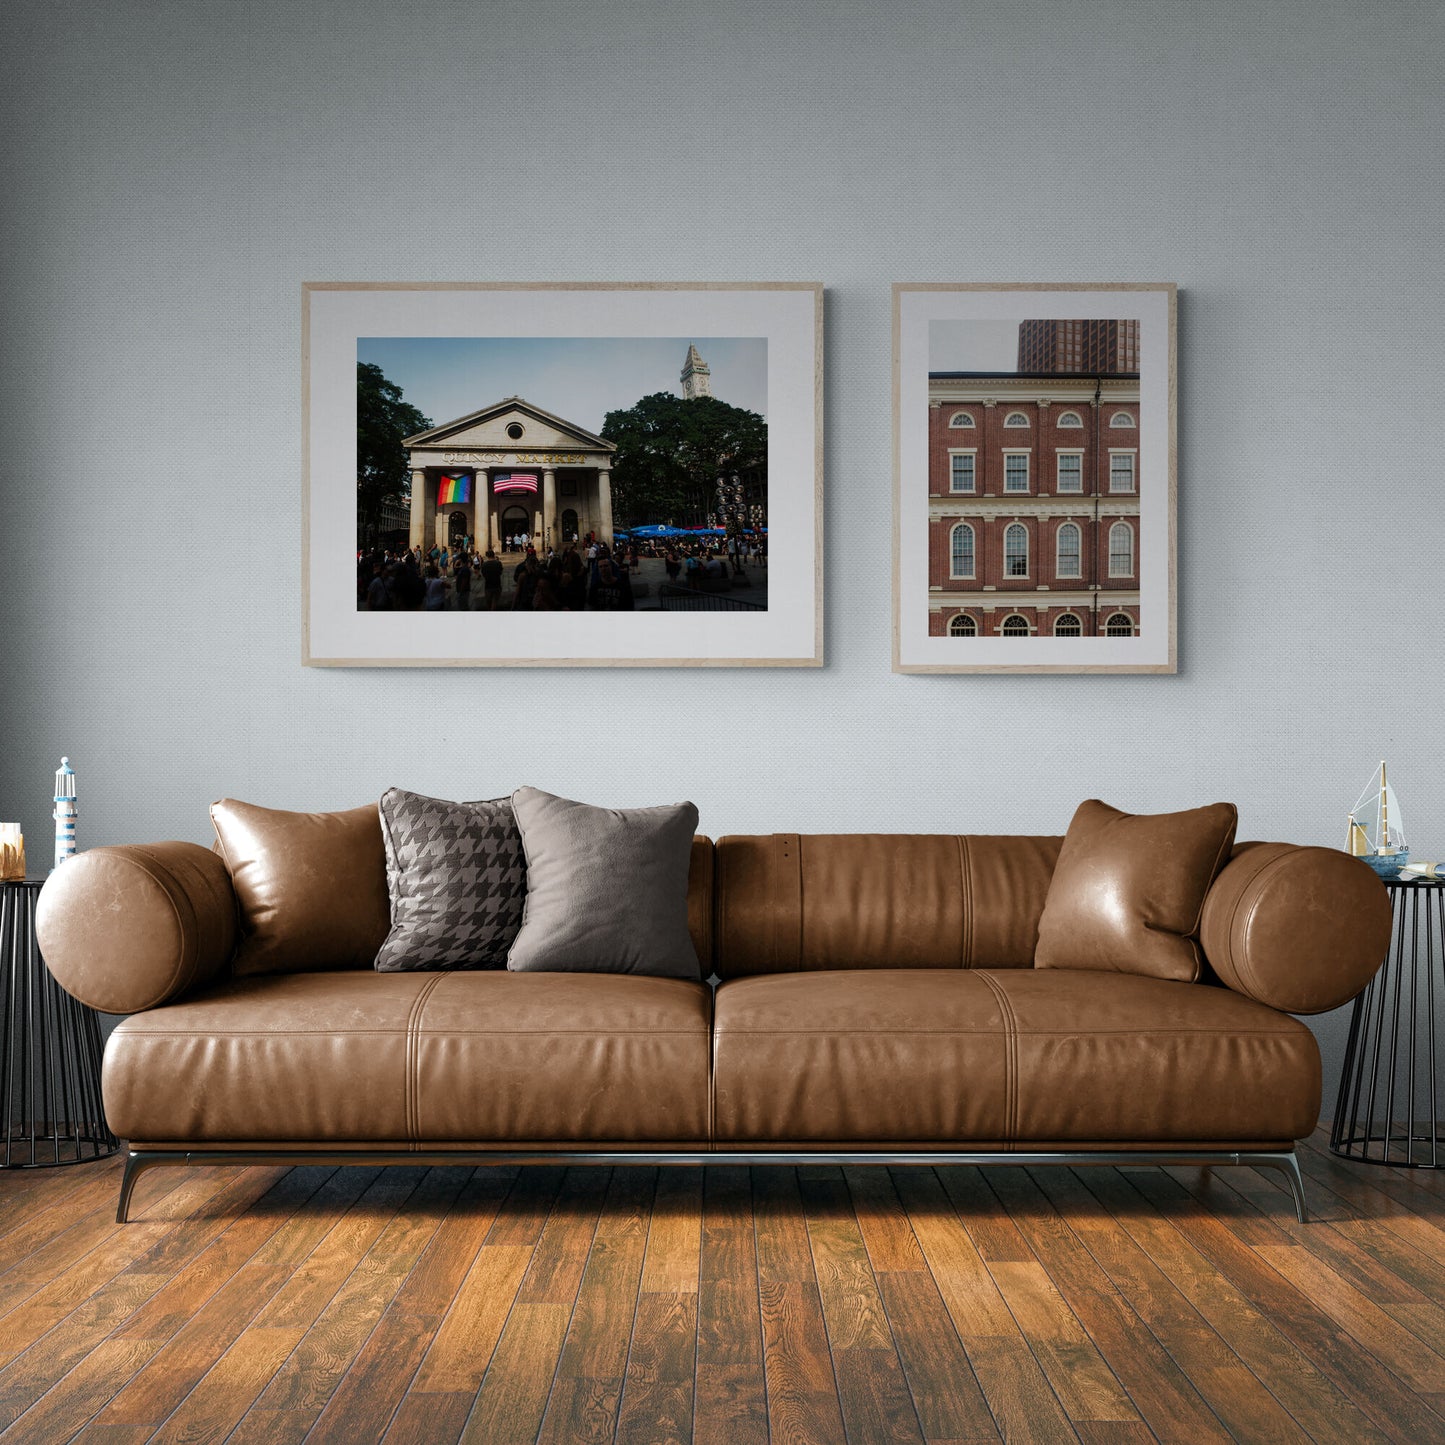 Photograph of Faneuil Hall and Quincy Market in Boston MA as Wall Art in a Living Room